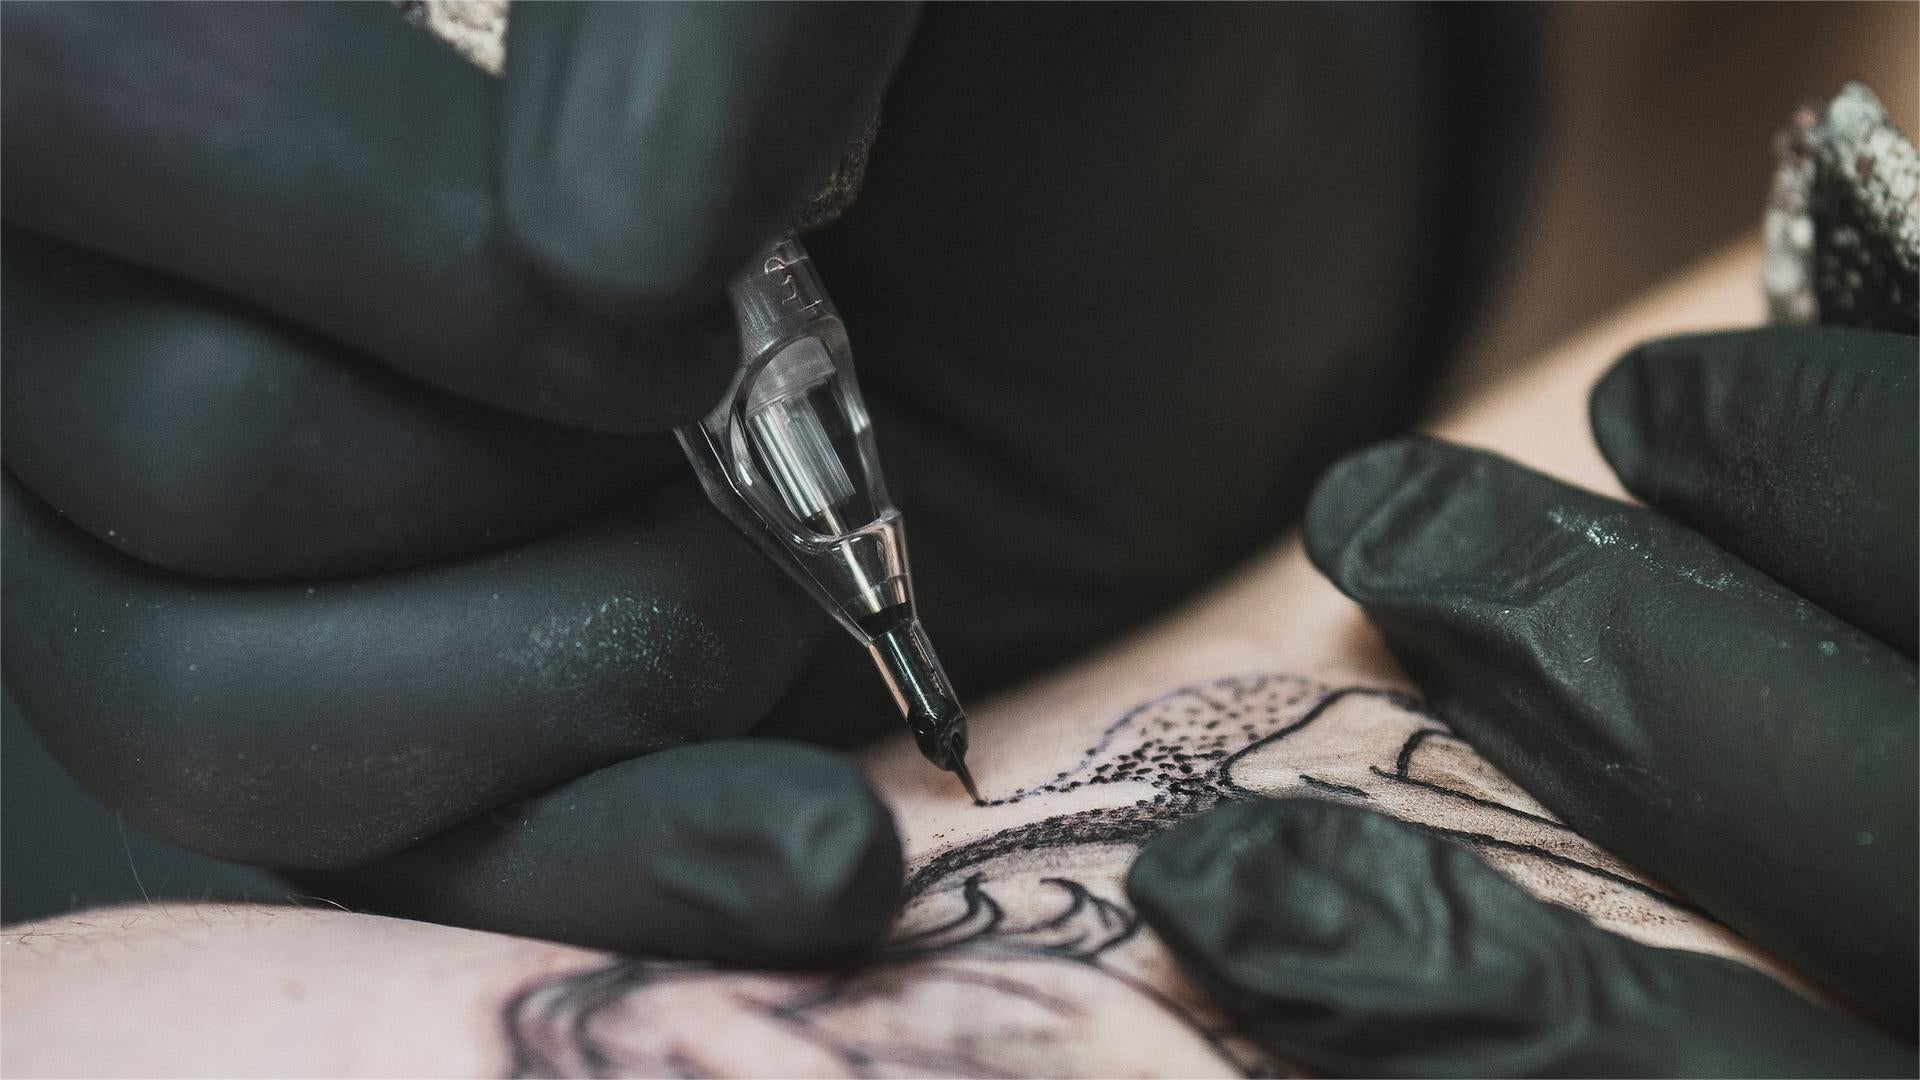 How to choose your tattoo kit?